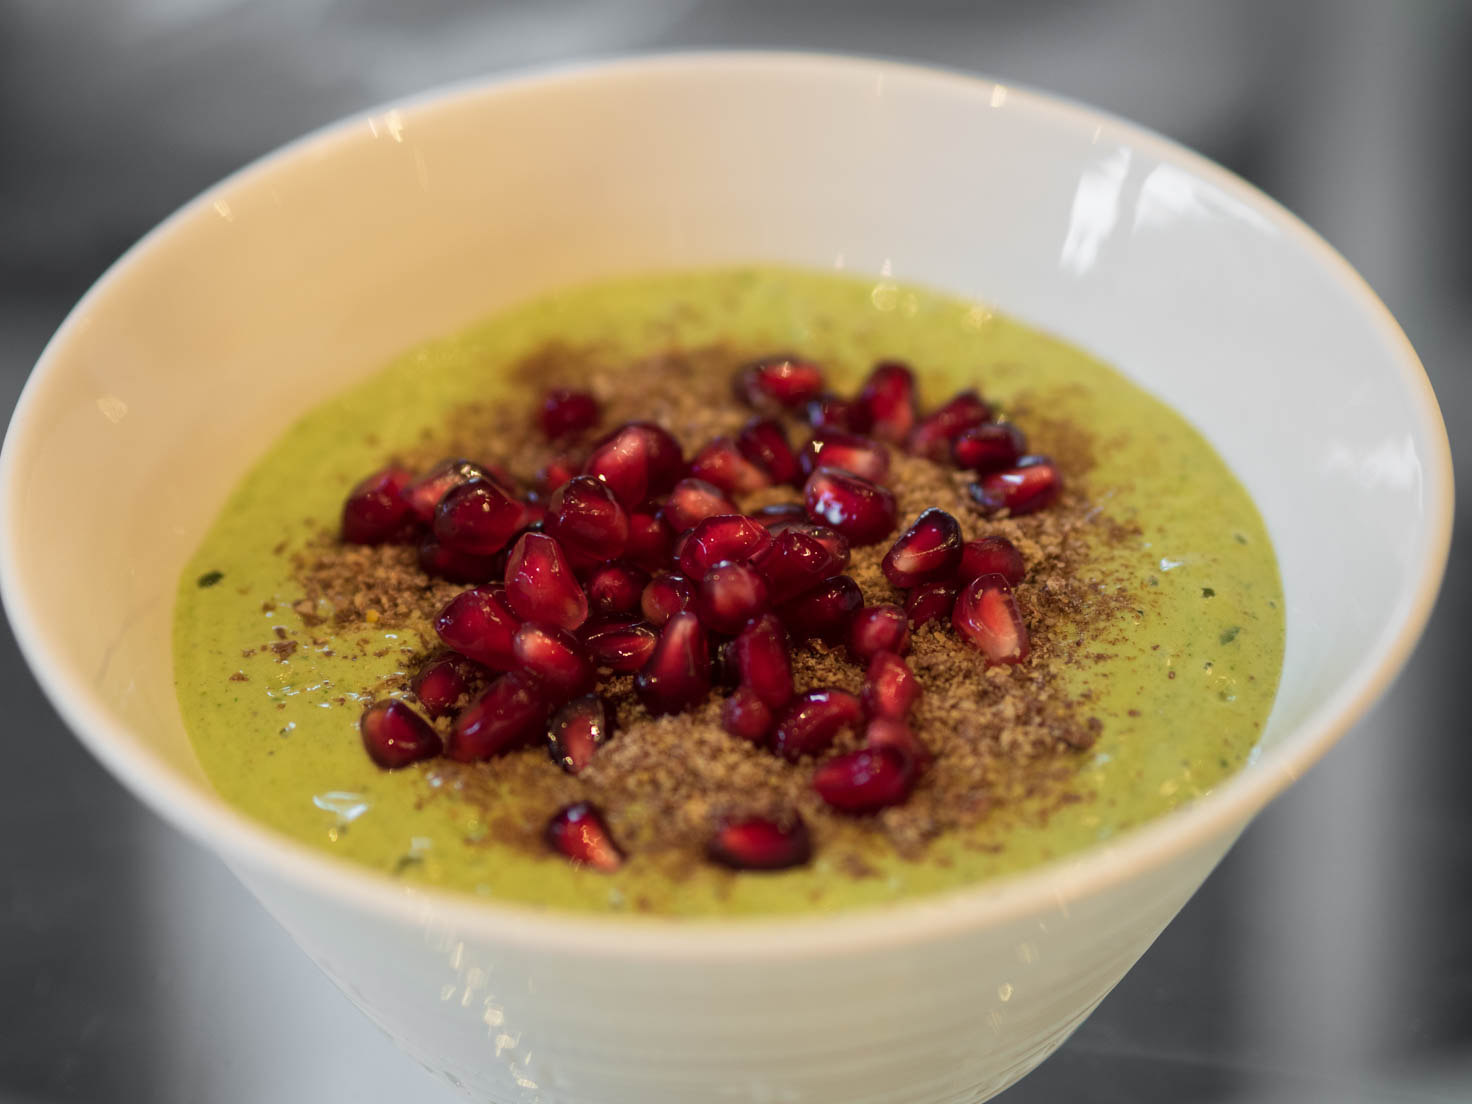 Lactose free yogurt with spinach, pumpkin seeds protein powder, flax seeds and pomegranate seeds